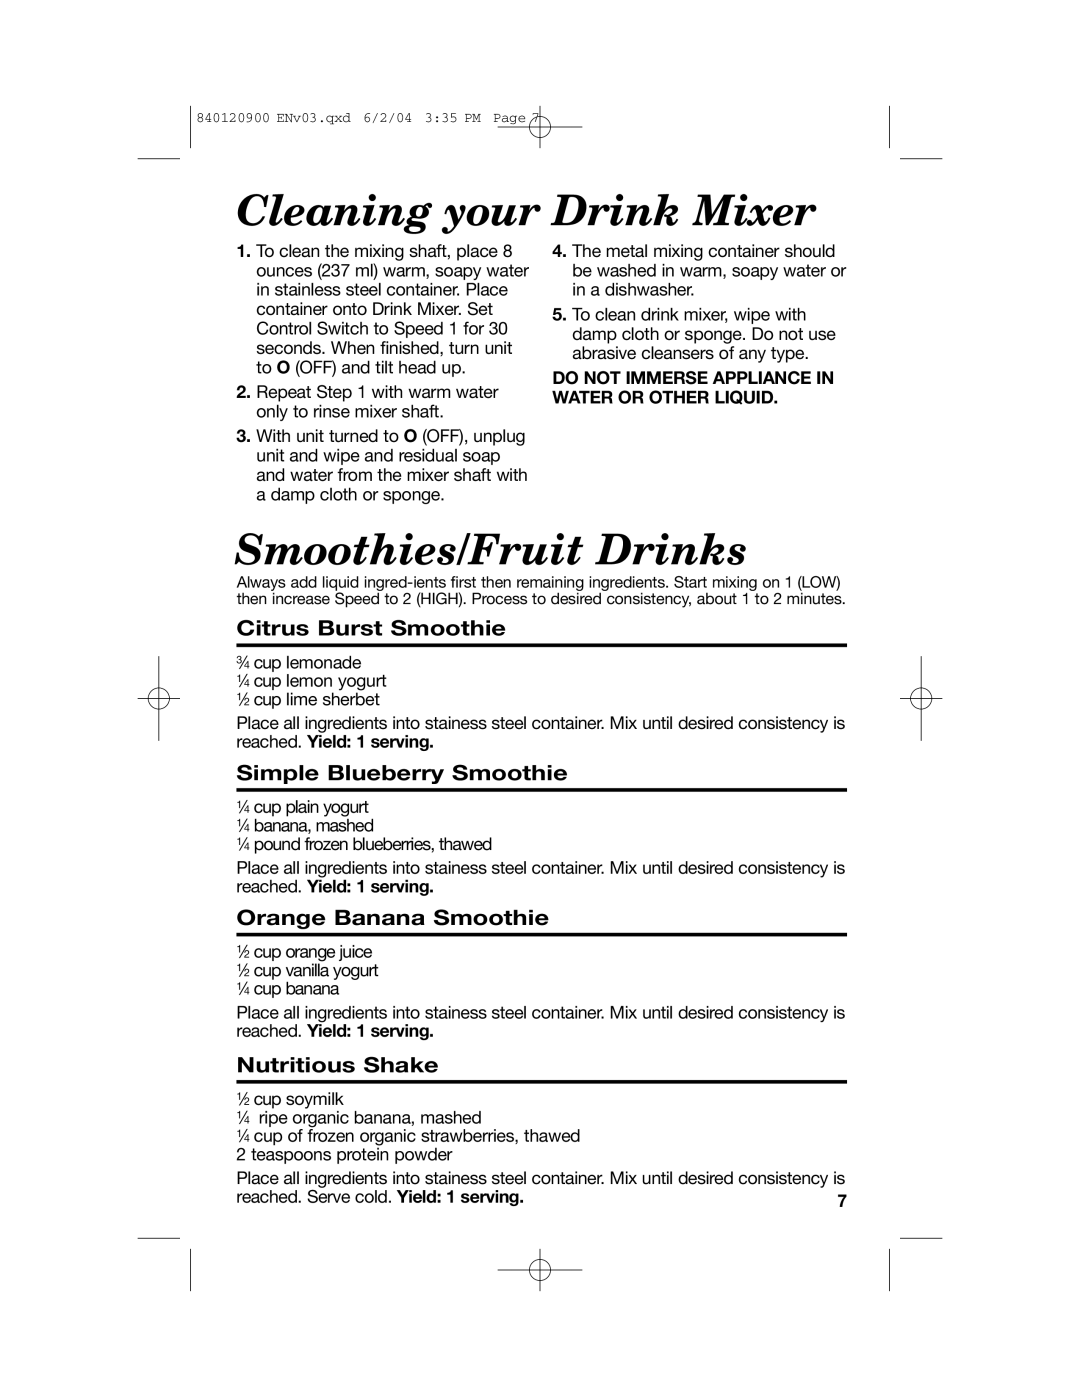 Hamilton Beach ALL-METAL DRINK MIXER manual Cleaning your Drink Mixer, Smoothies/Fruit Drinks, Citrus Burst Smoothie 